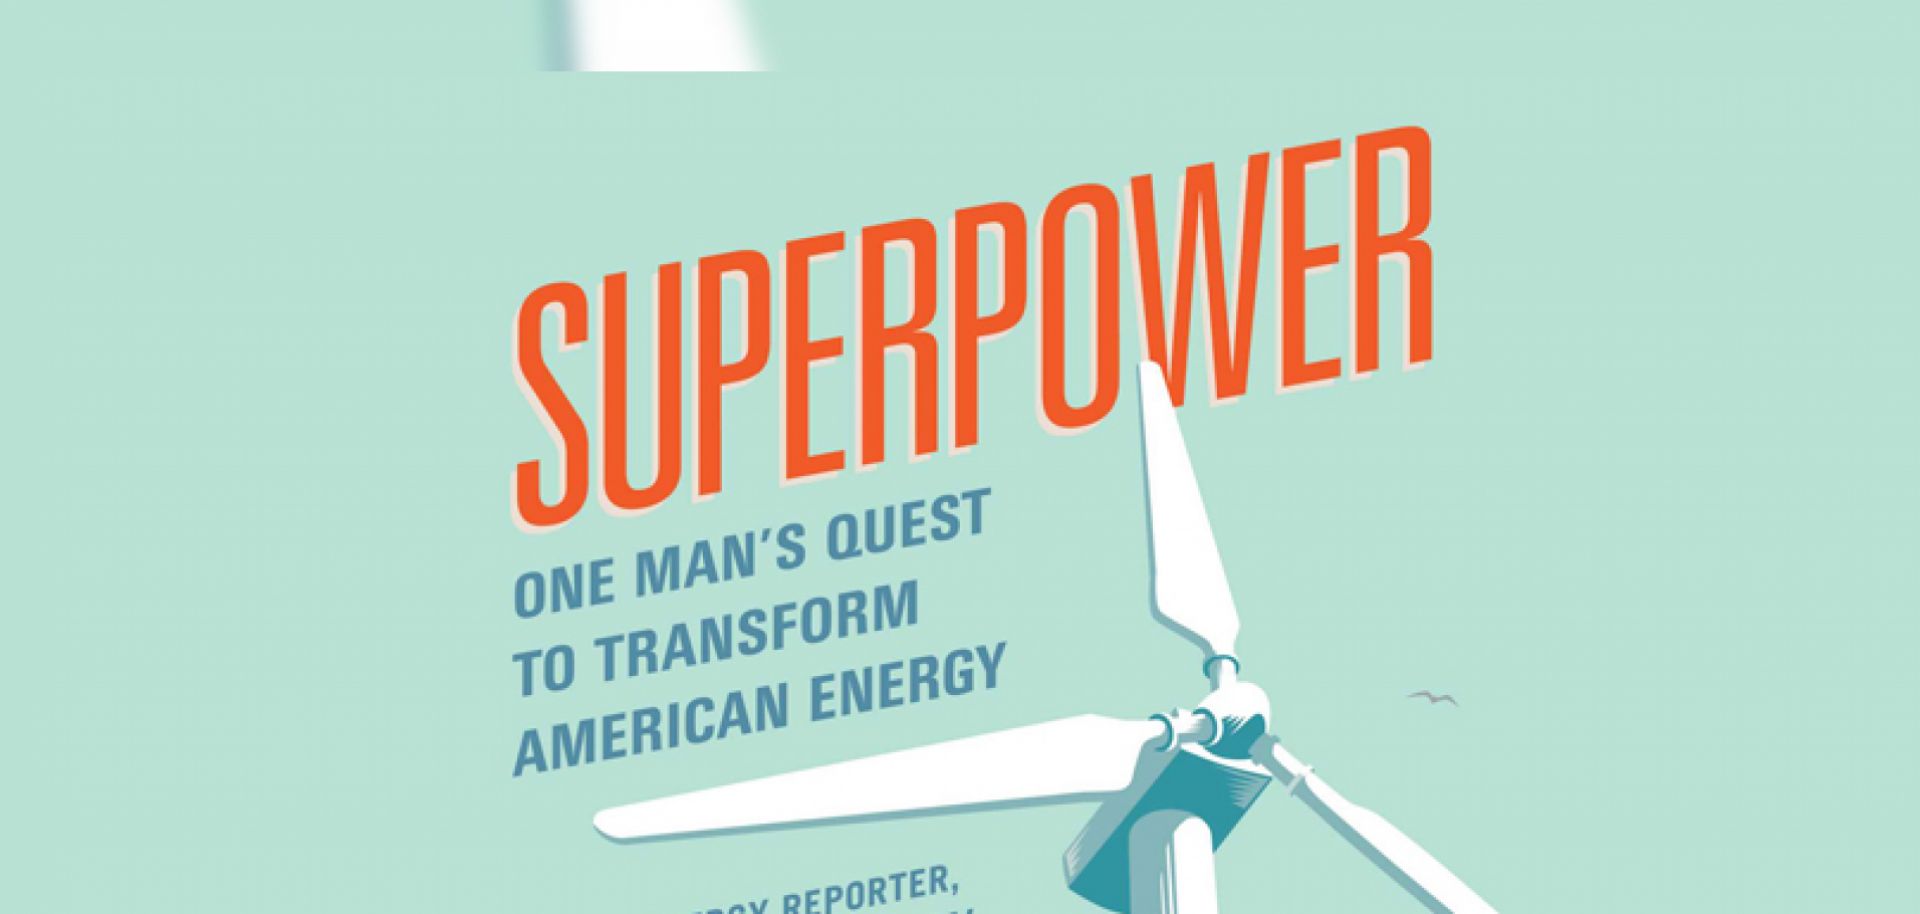 Russell Gold's book Superpower discusses America's energy future